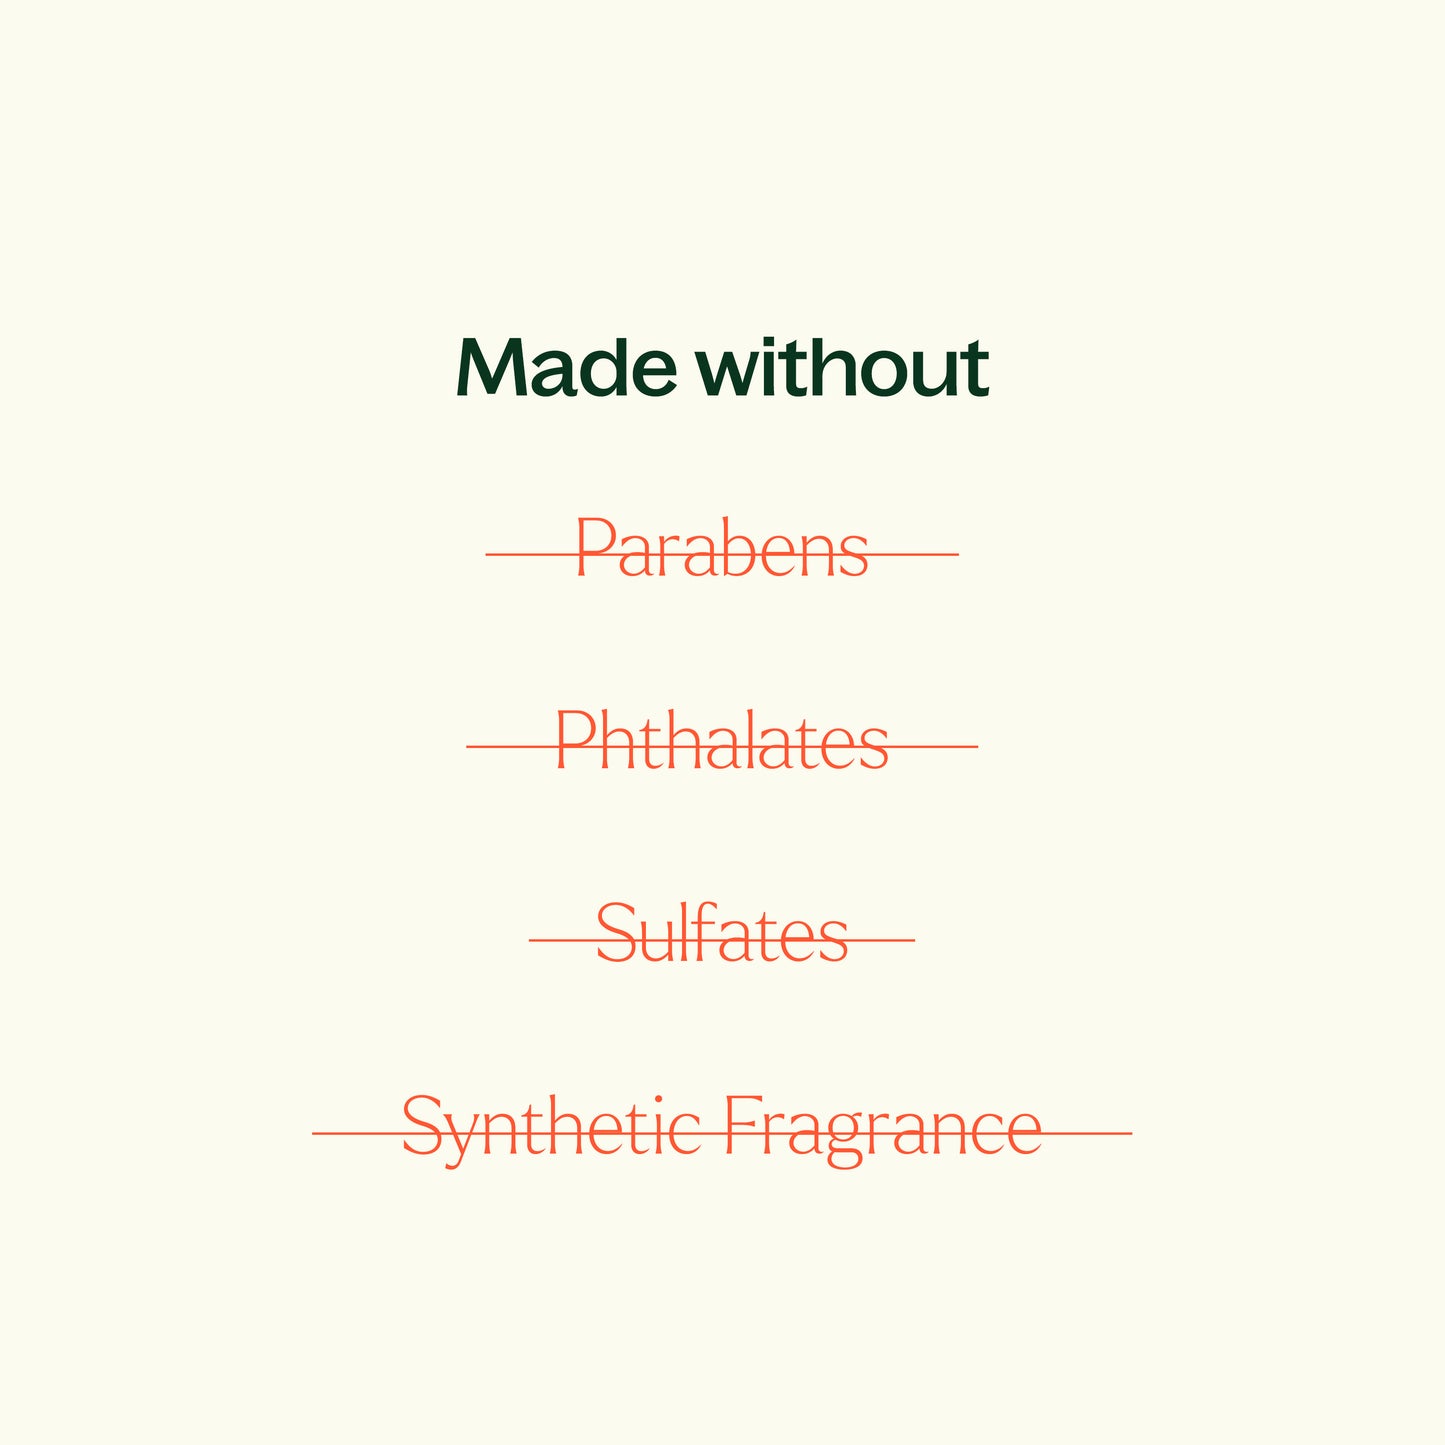 made without parabens, phthalates, sulfates, synthetic fragrance